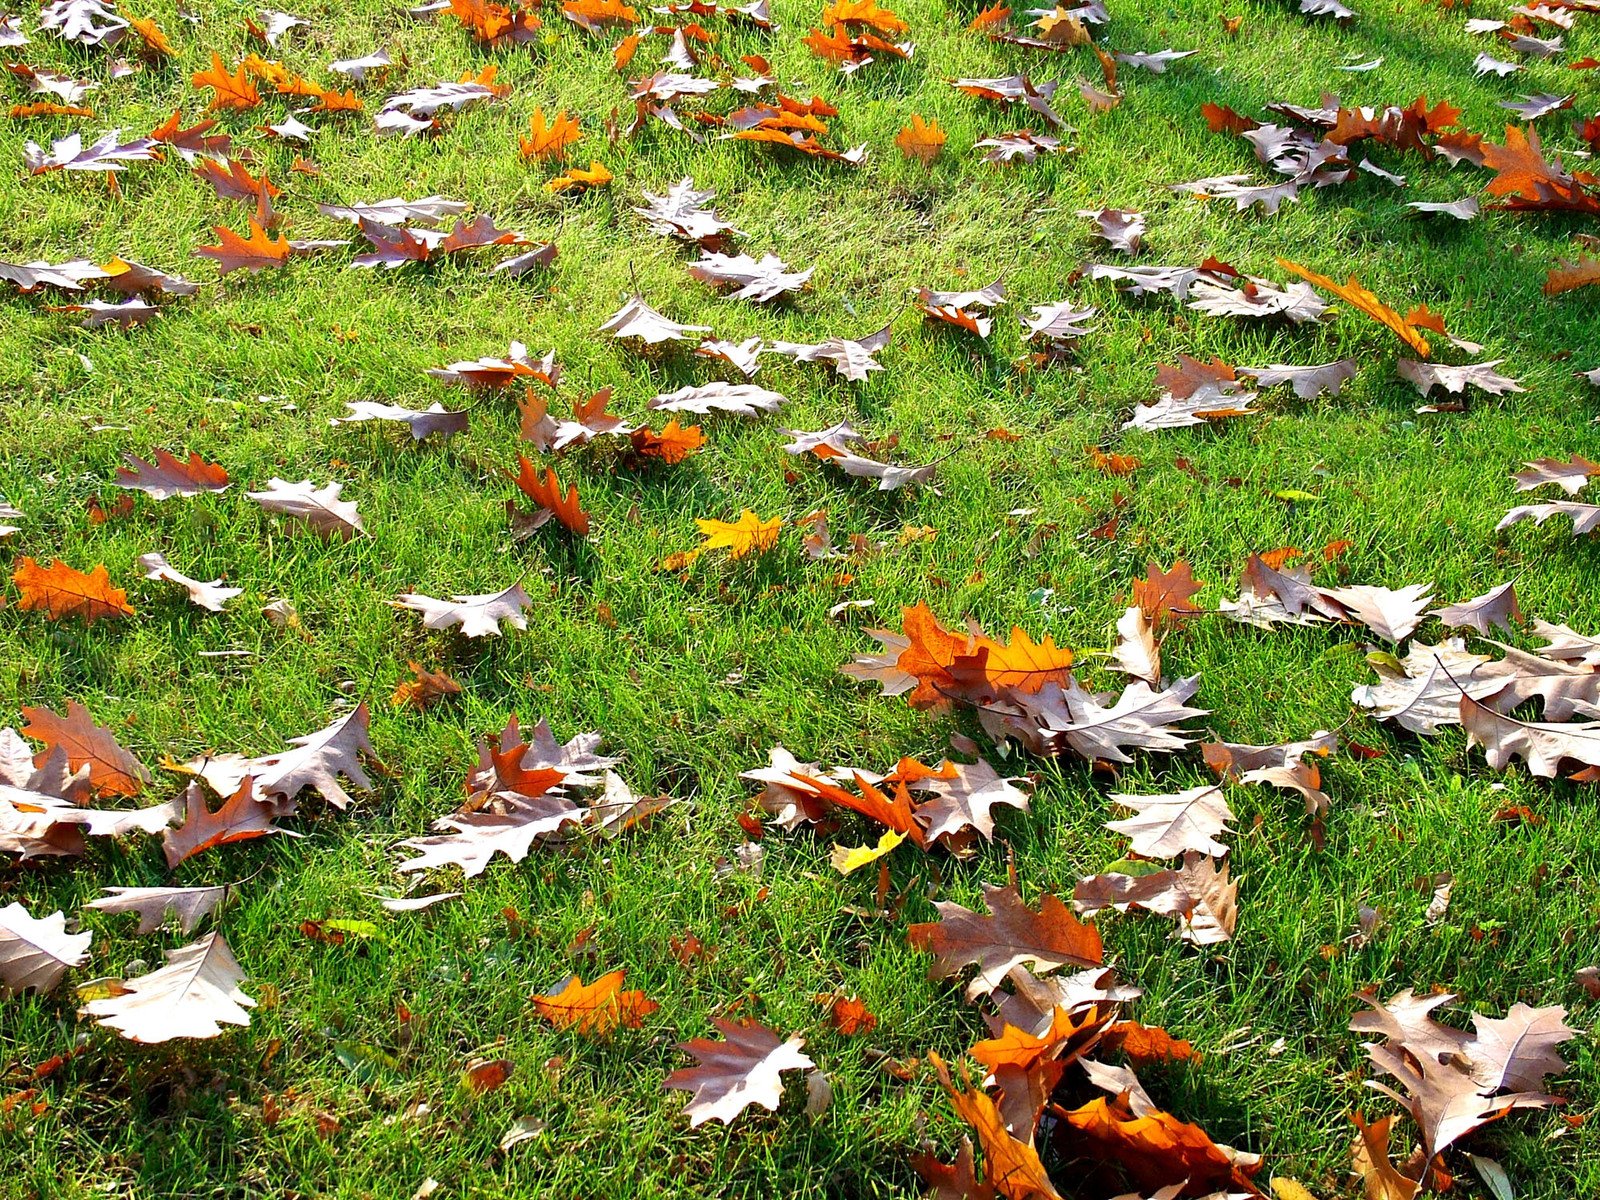 the field is full of yellow and orange leaves